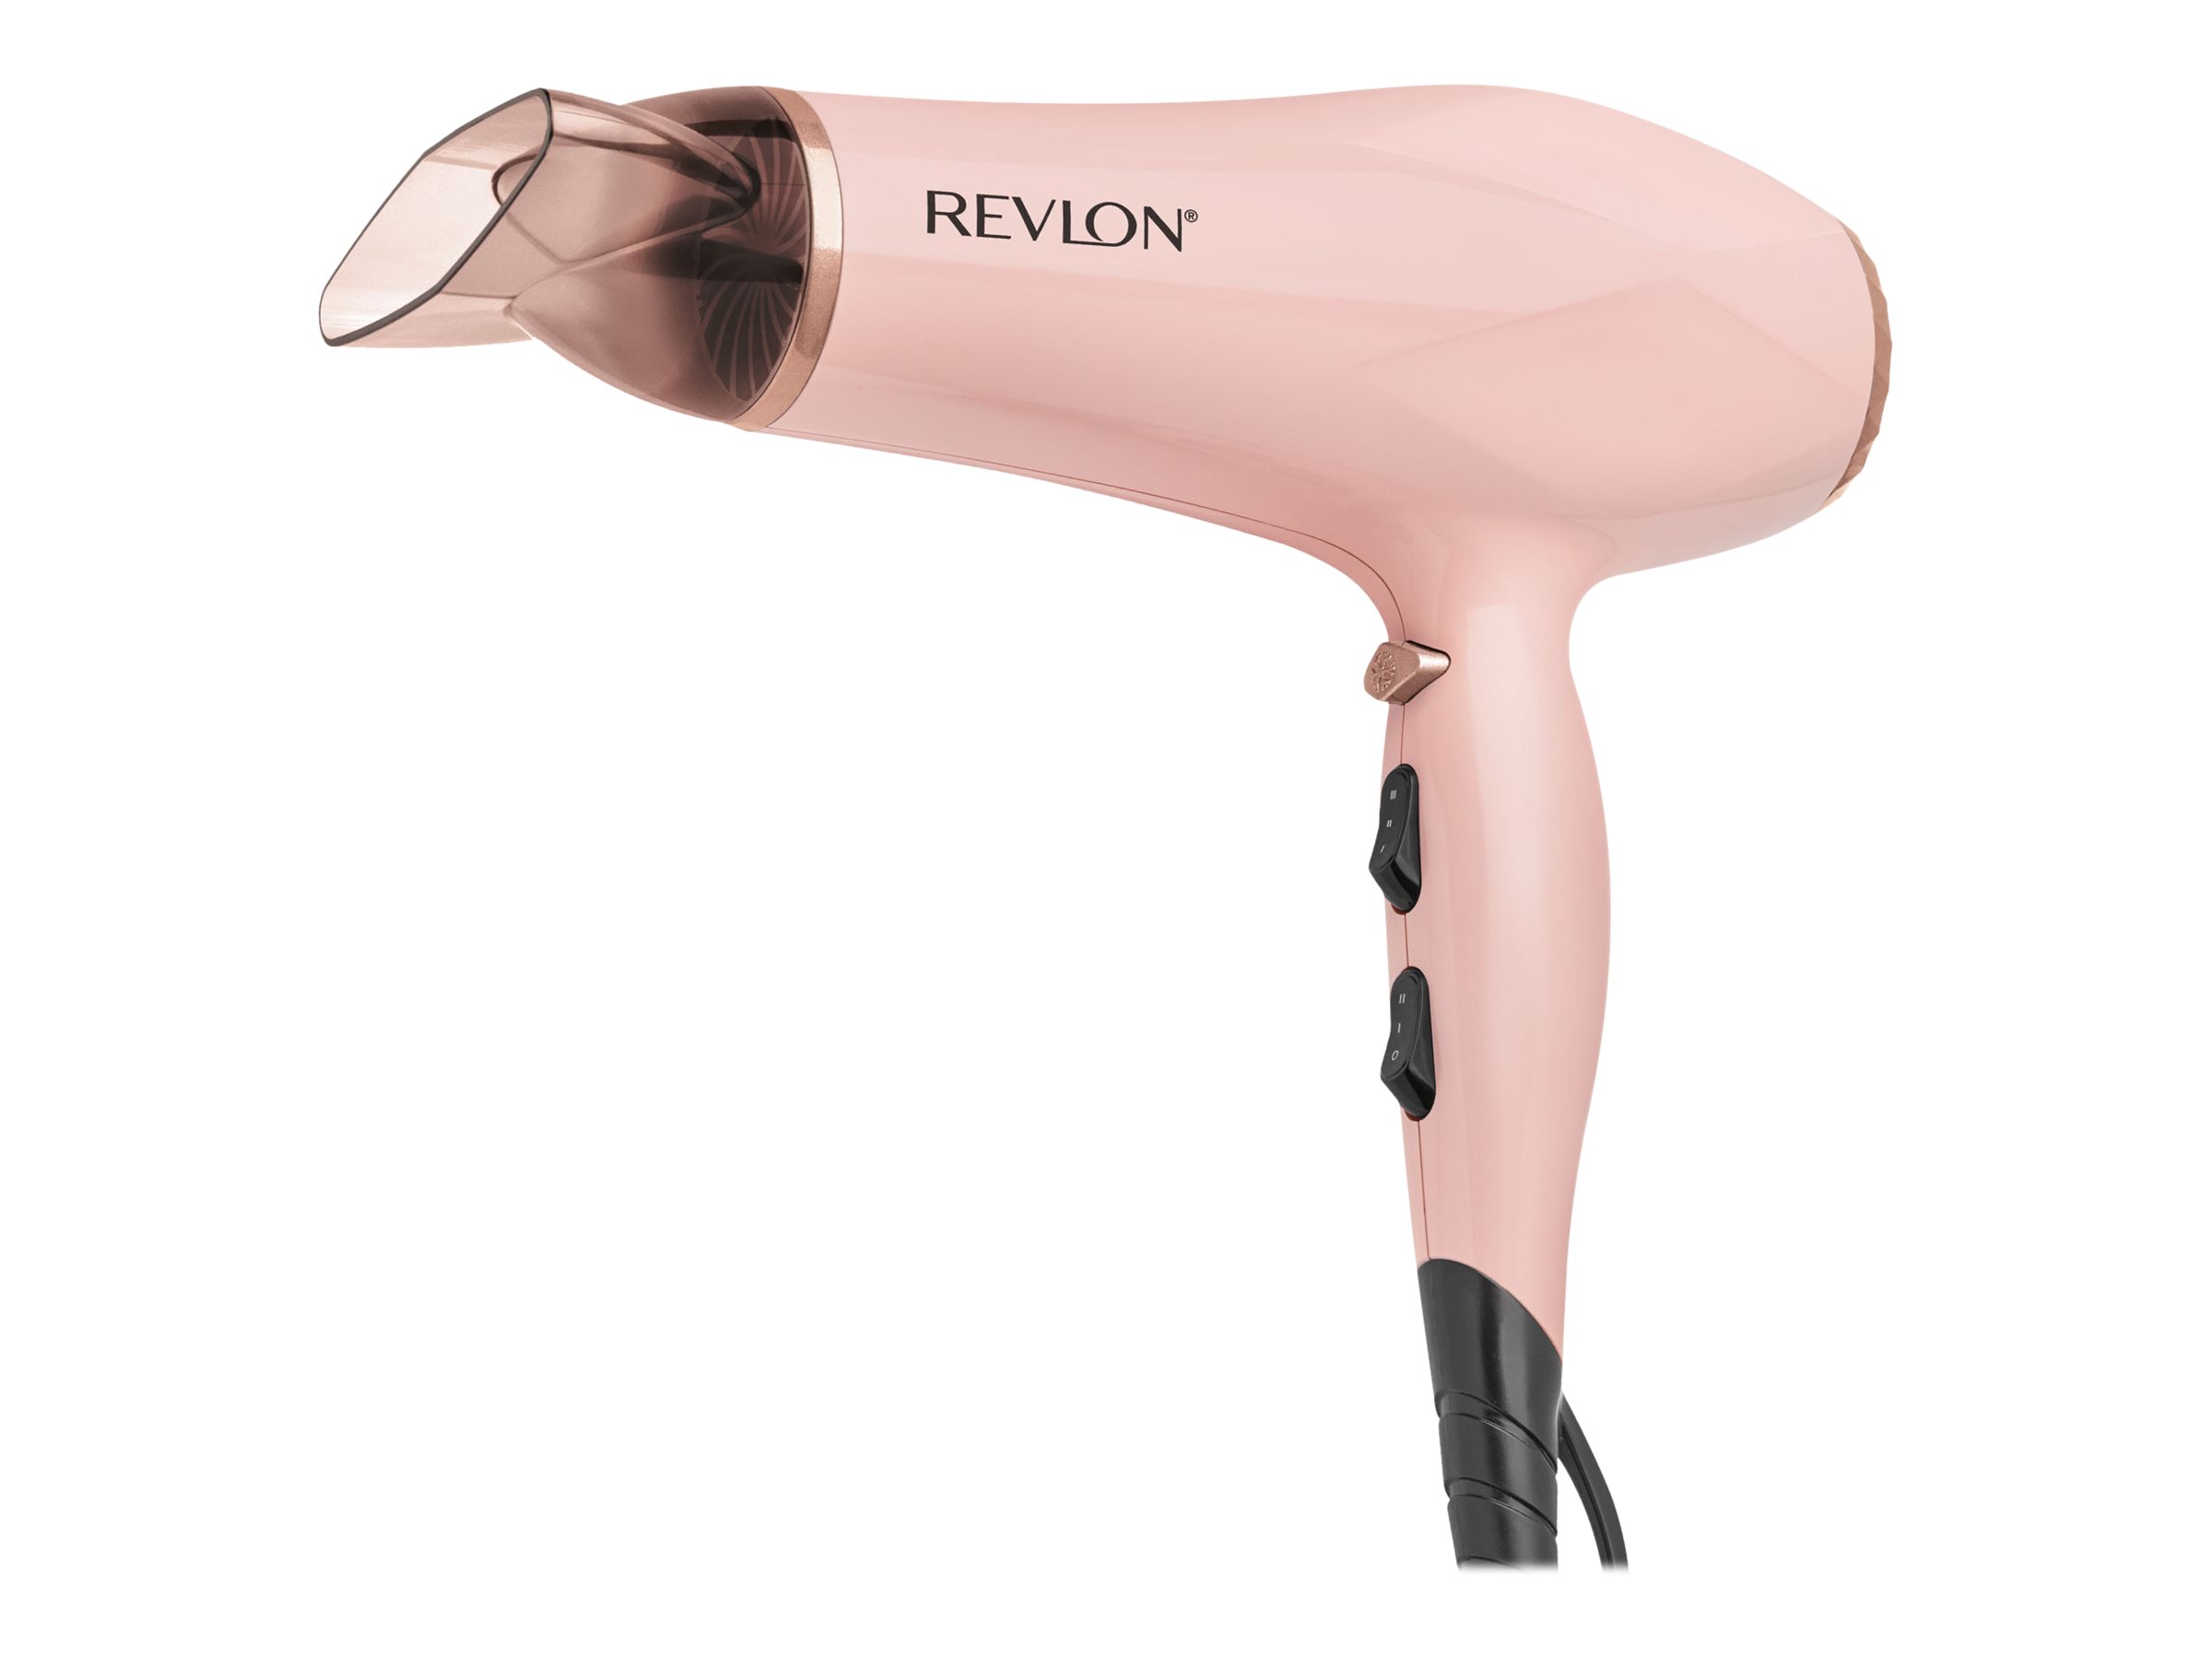 Revlon Pro Collection Beauty Blowout Hair Styler - Pink - RVDR5271F